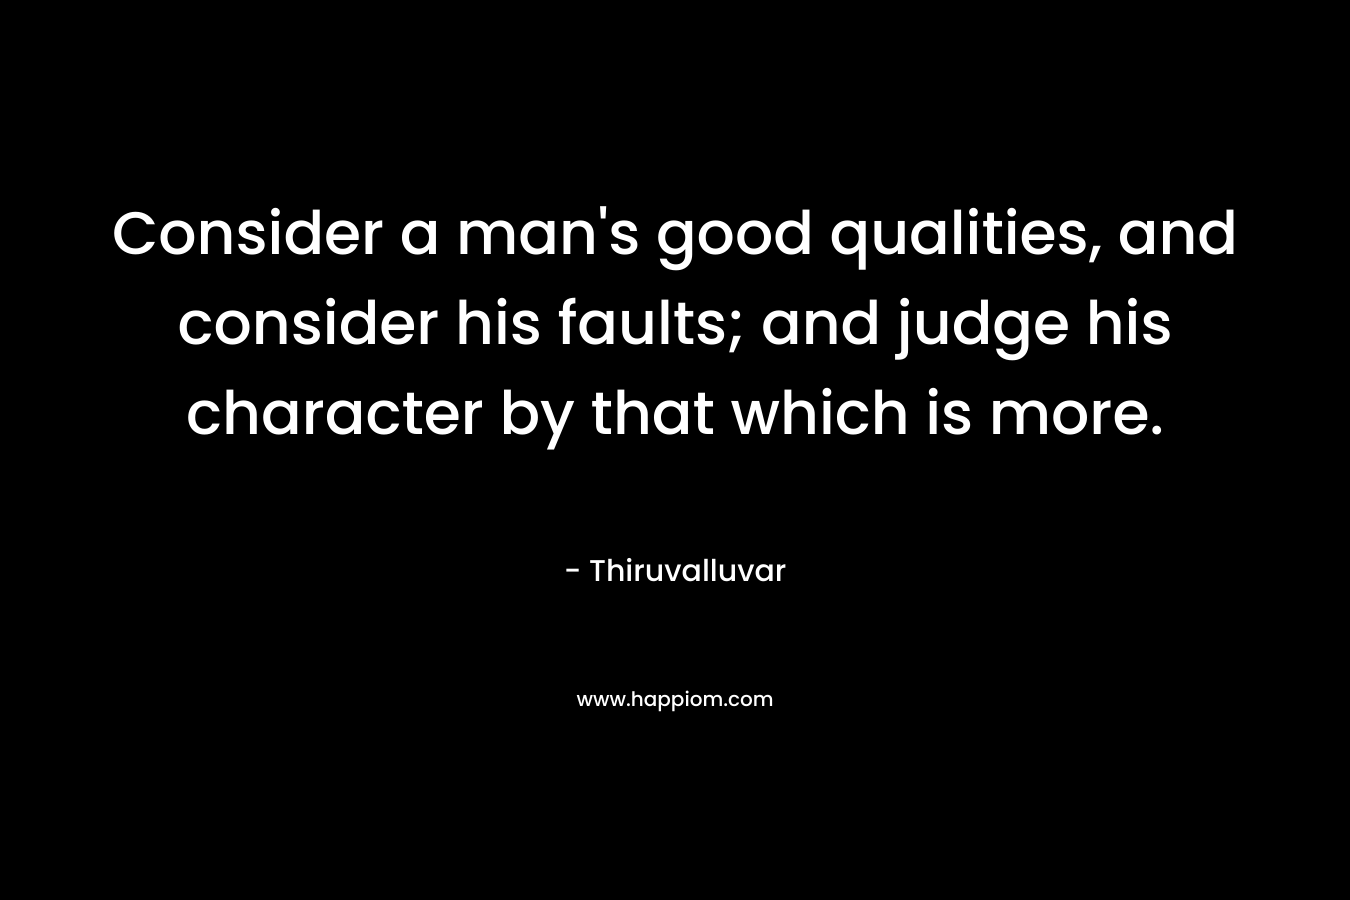 Consider a man's good qualities, and consider his faults; and judge his character by that which is more.